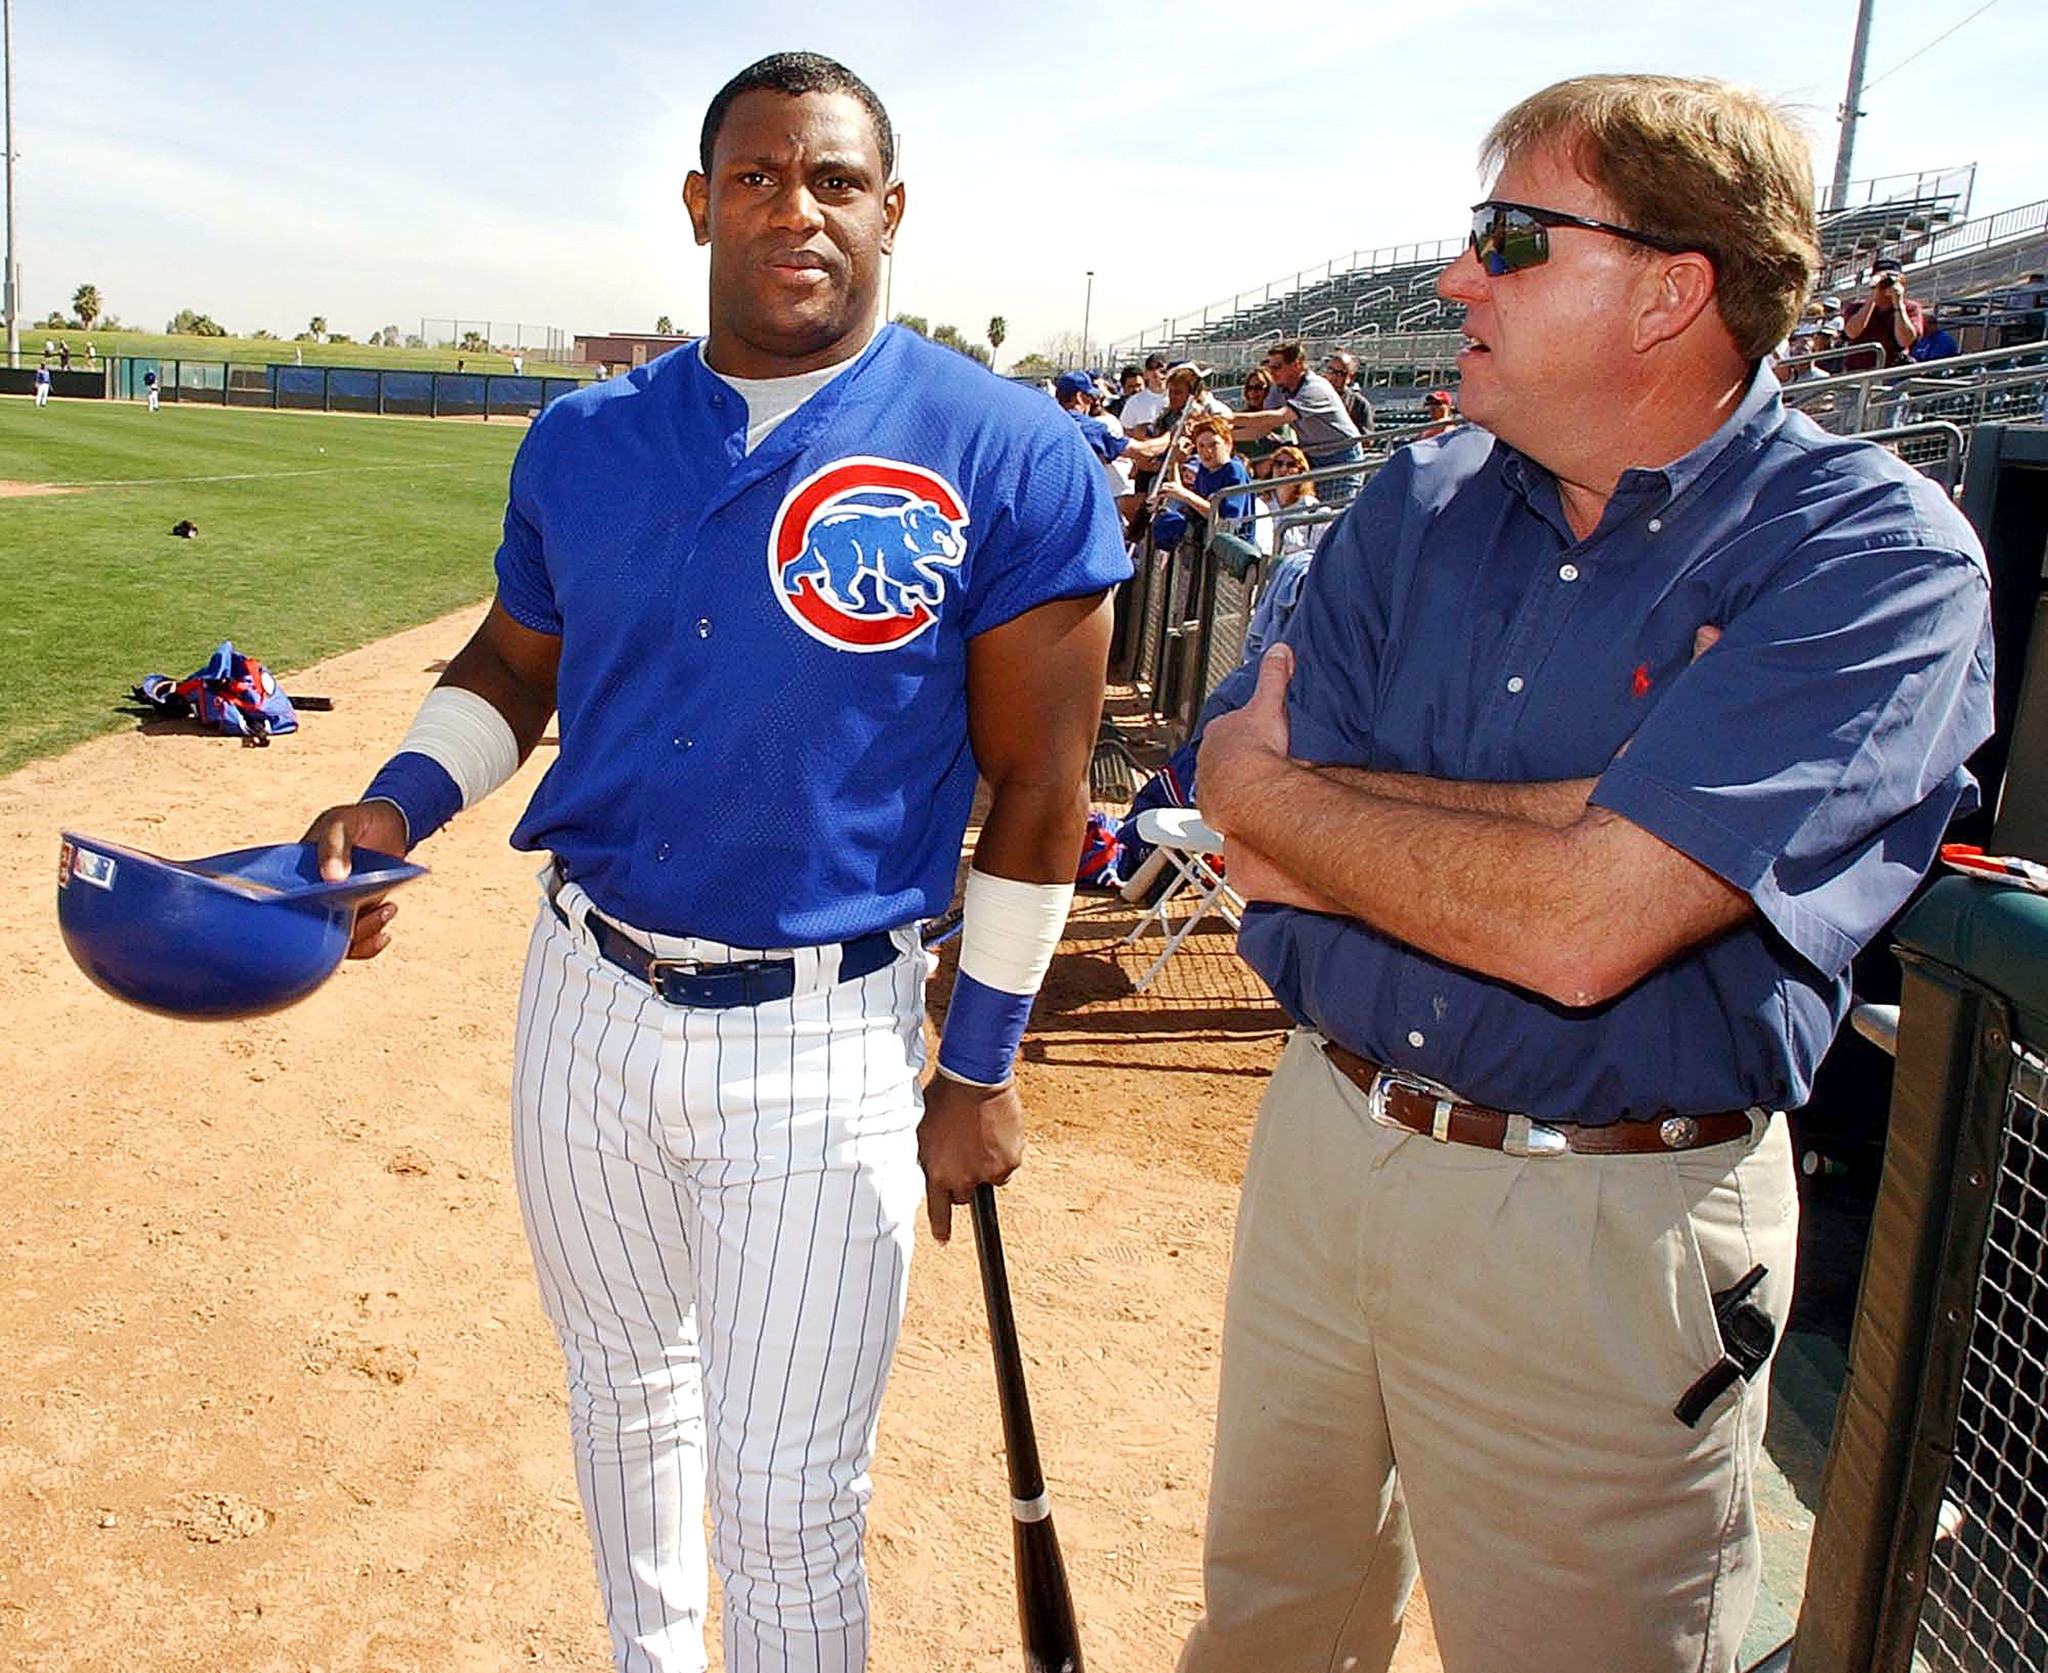 This Day in Chicago Sports on X: 𝐌𝐚𝐫𝐜𝐡 𝟑𝟎, 𝟏𝟗𝟗𝟐 The White Sox  traded Sammy Sosa to the Cubs in exchange for George Bell. Sammy went o